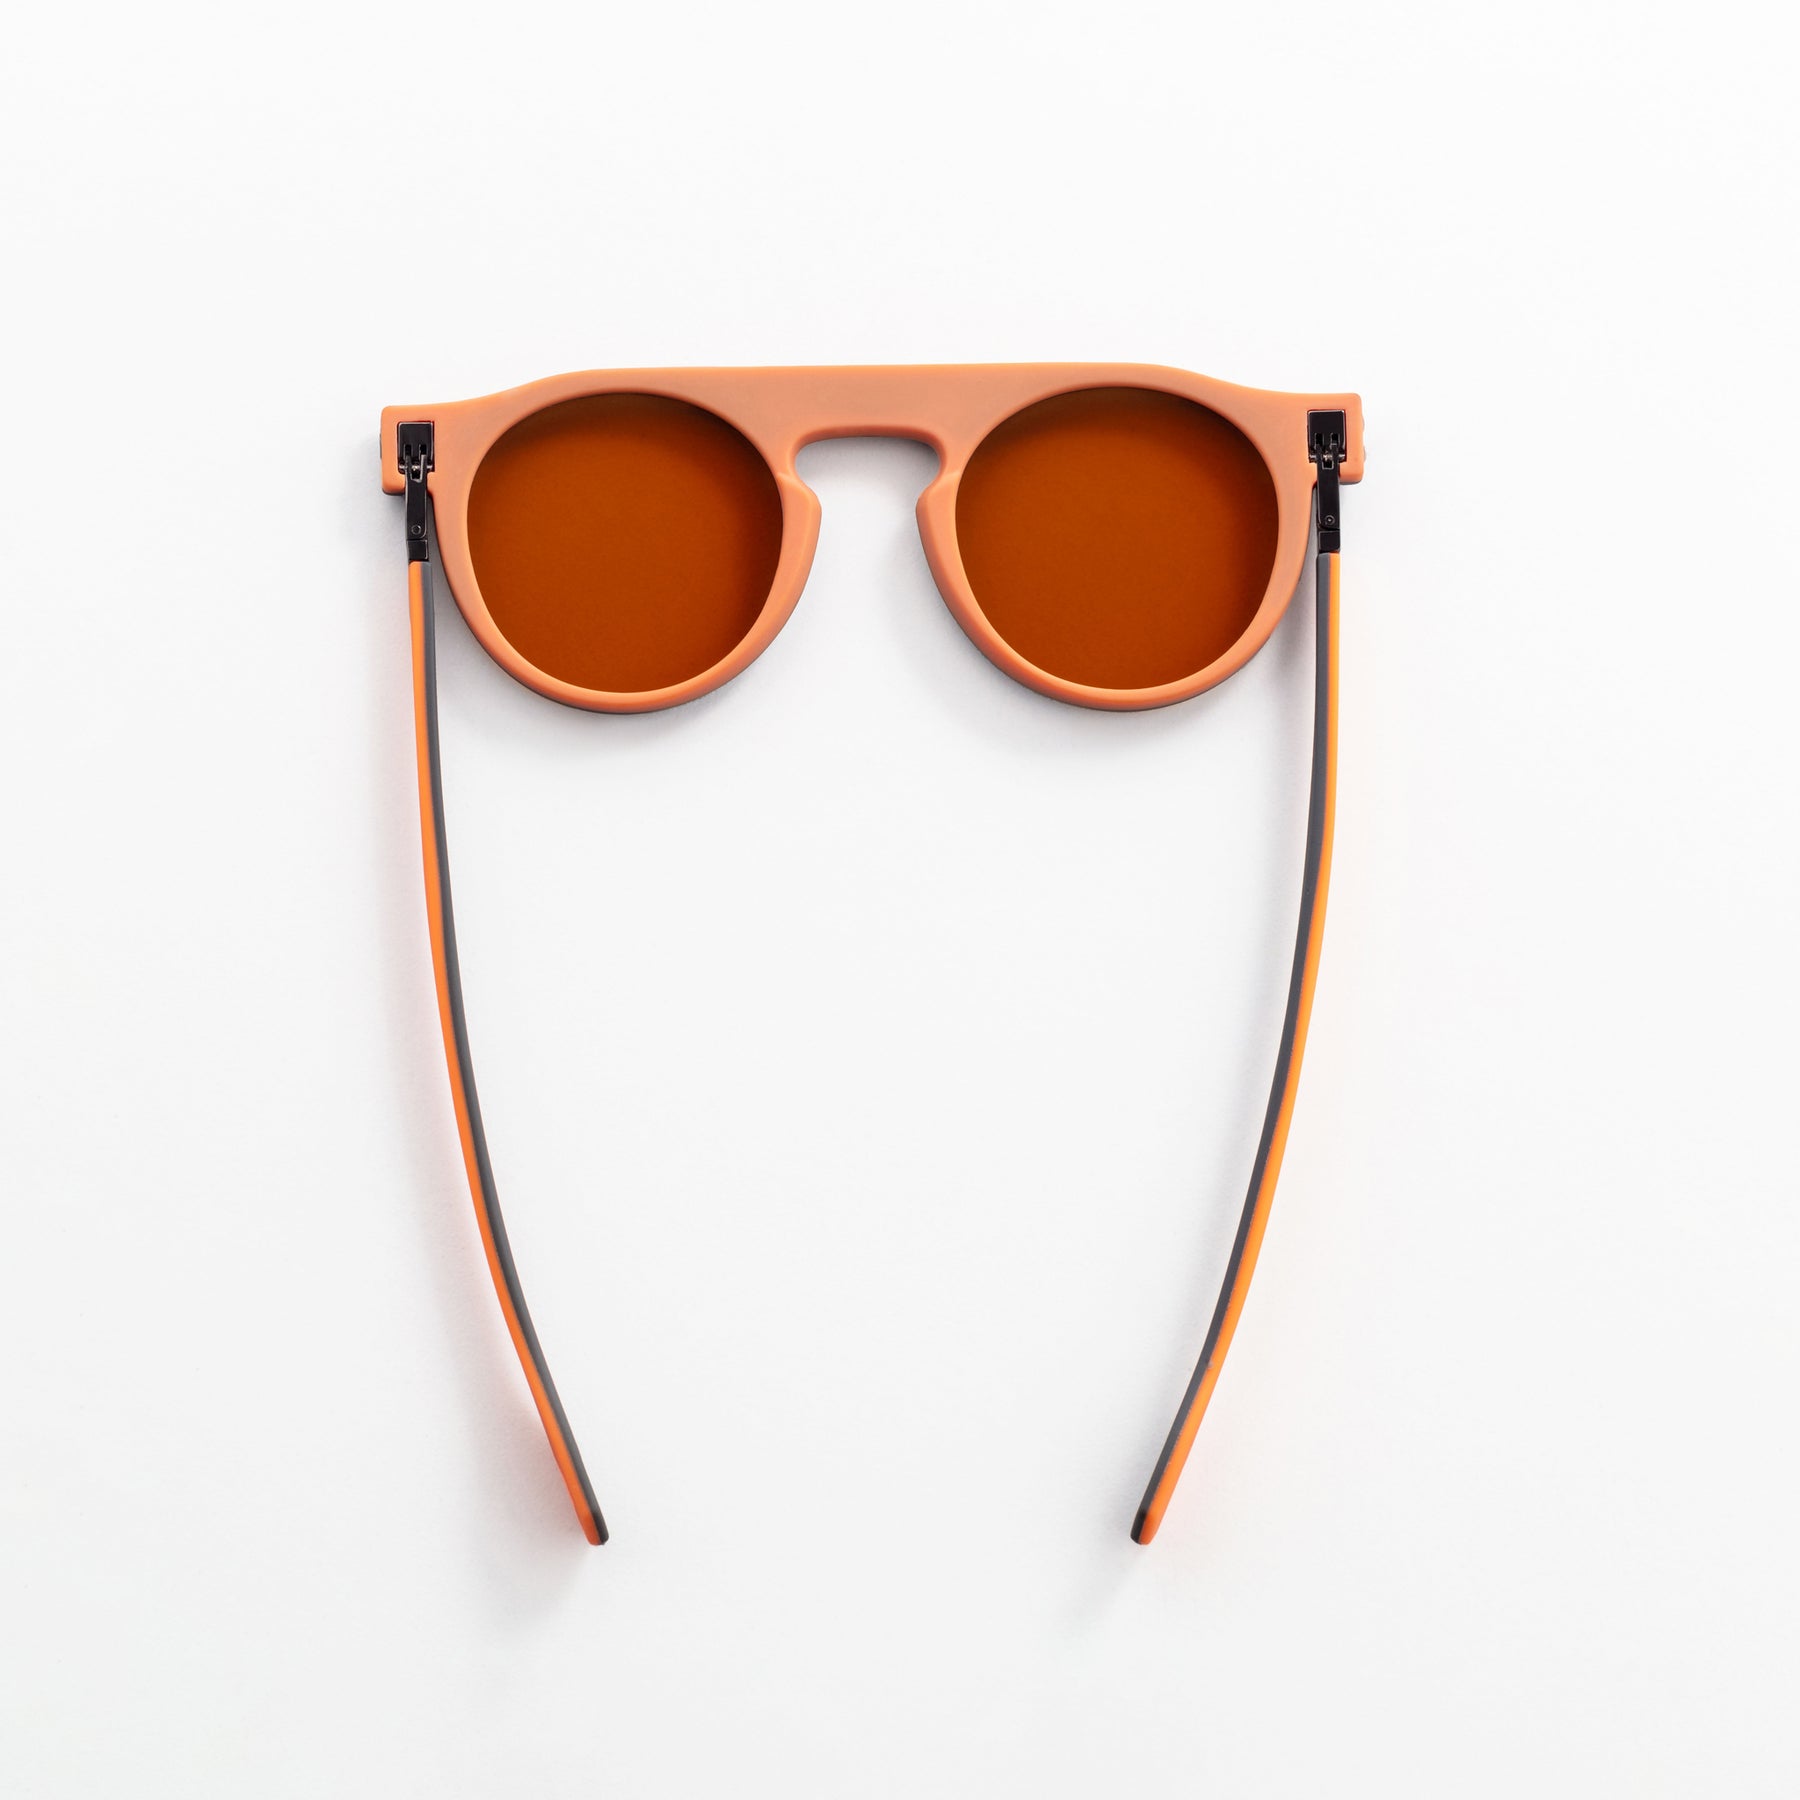 Colour Energy Therapy Glasses- Orange – Hanna's Herb Shop